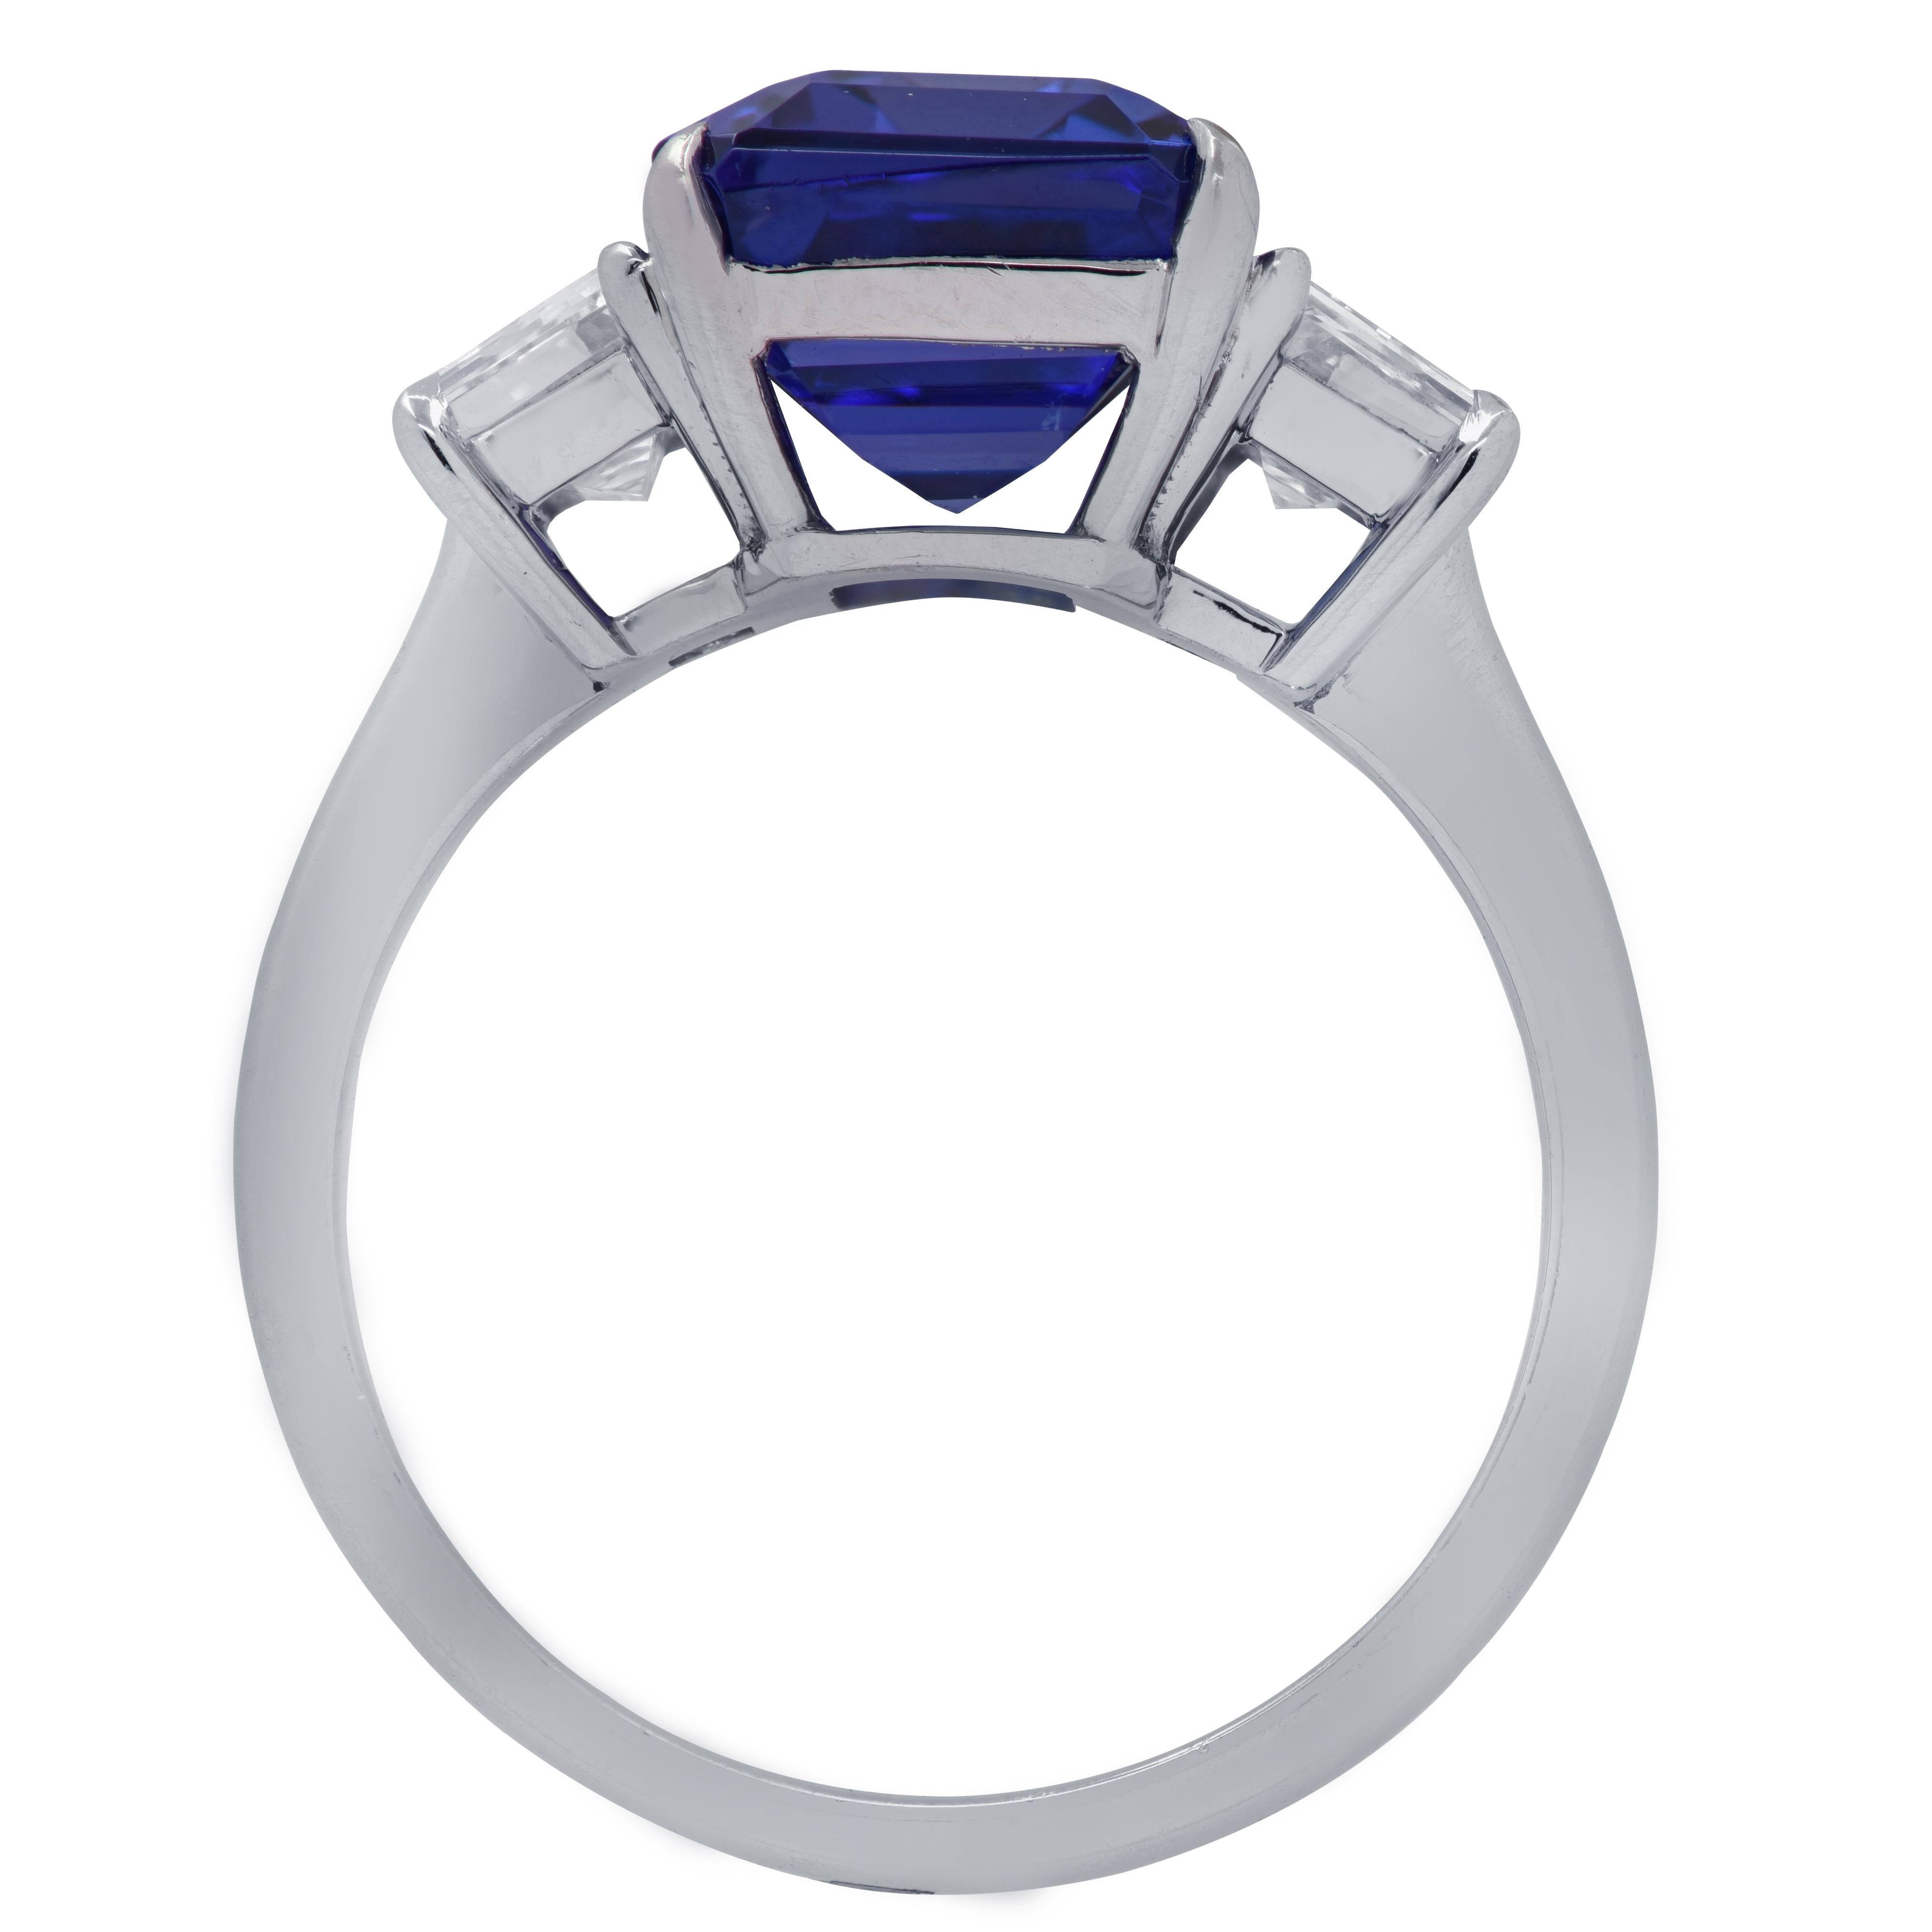 Spectacular Vivid Diamonds ring, handcrafted in Platinum featuring a 4.29 carat Emerald Cut Tanzanite adorned with 2 step cut trapezoid diamonds weighing .94 carats total, F color and VS clarity. The band of this stunning ring measures 2.2 mm 2.67